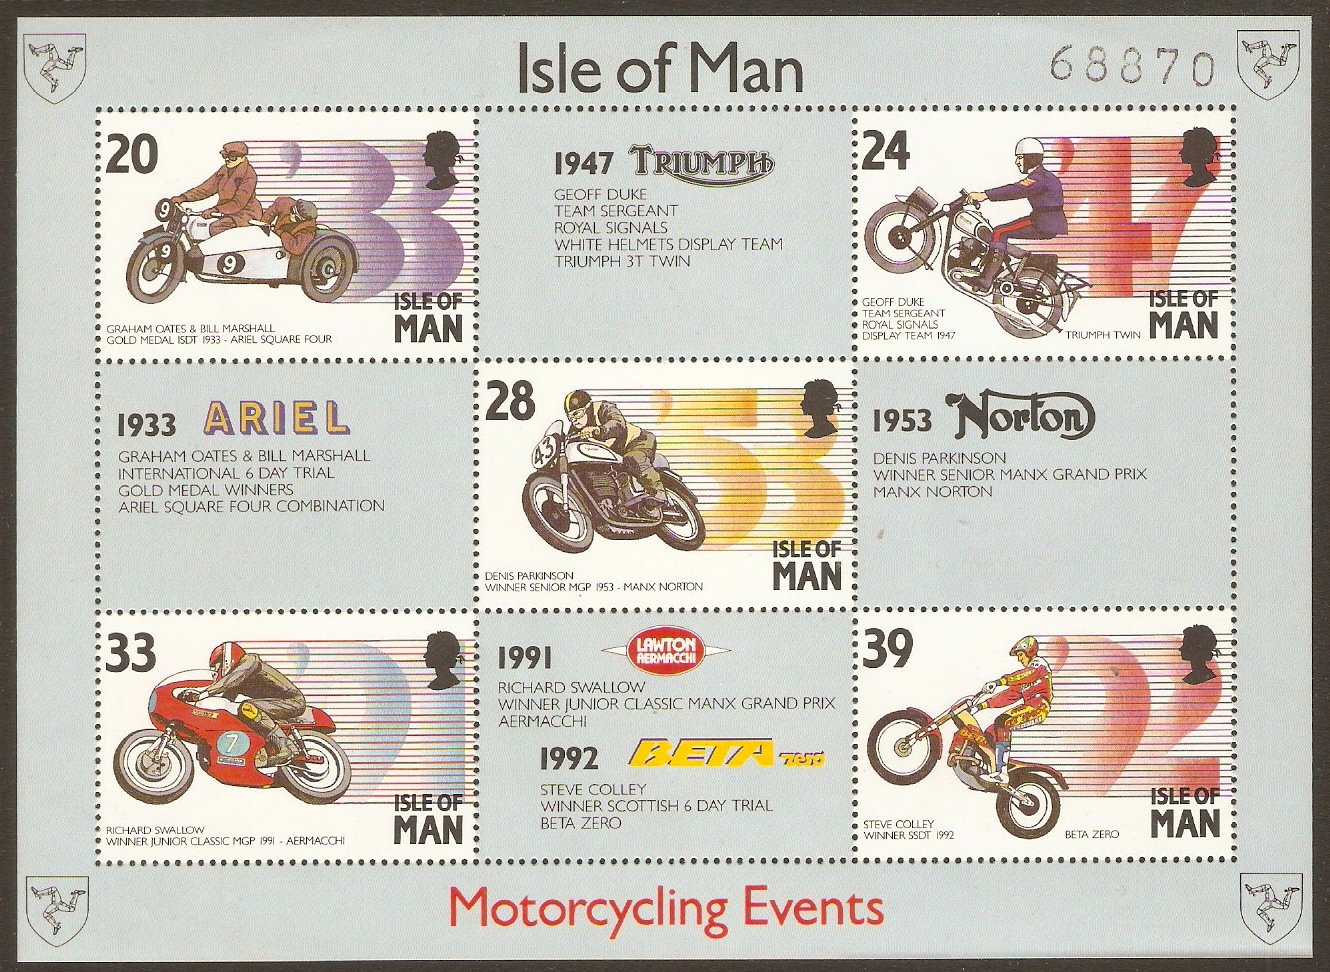 Isle of Man 1992 Motor Cycling Events Sheet. SGMS572.